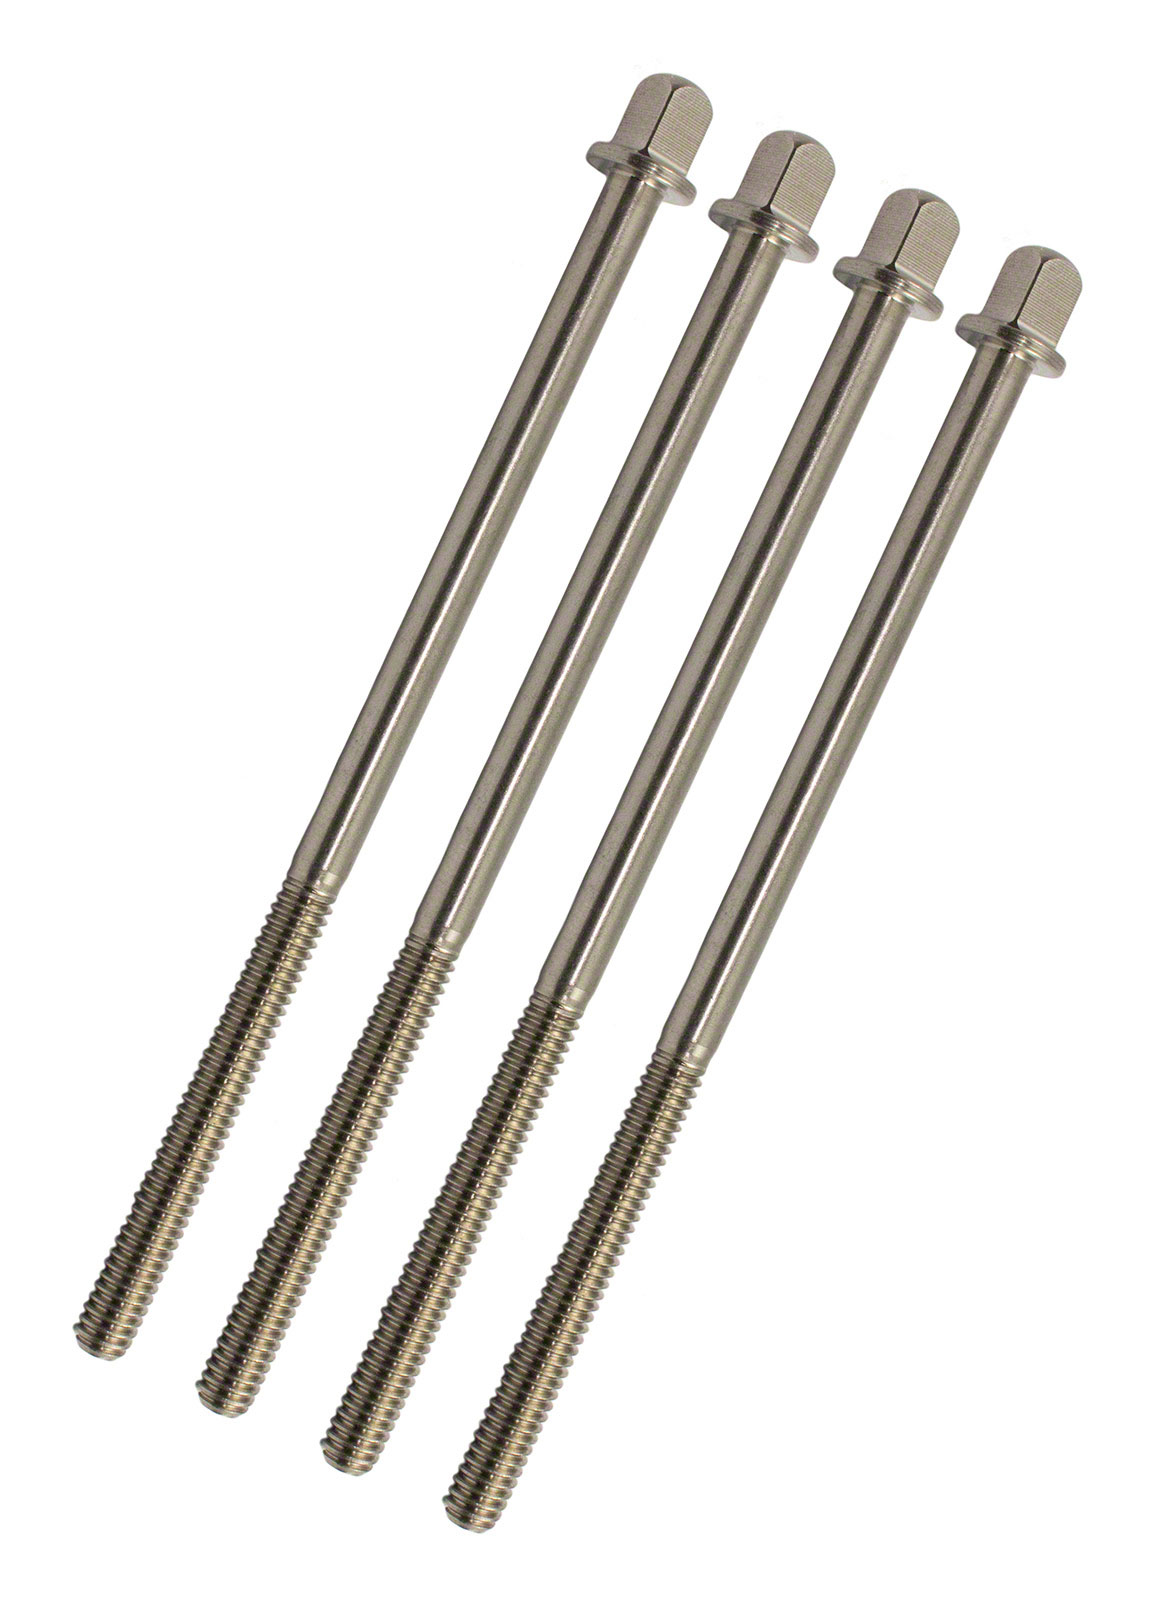 SPAREDRUM TRSS-110 - 110MM TENSION ROD - STAINLESS STEEL - 7/32